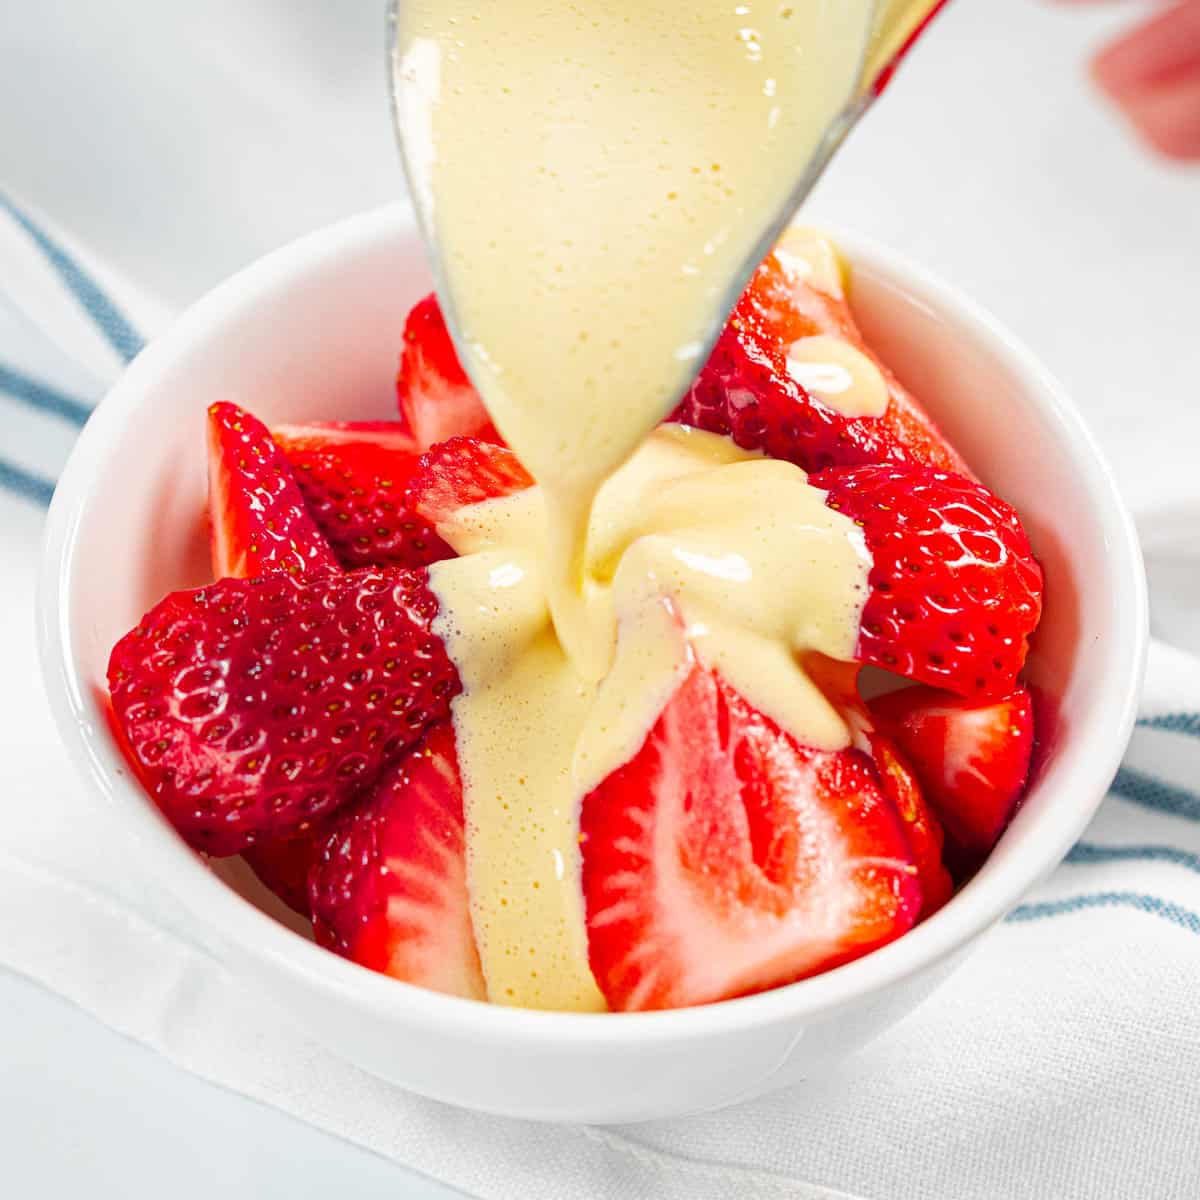 Zabaglione poured over a bowl of strawberries.